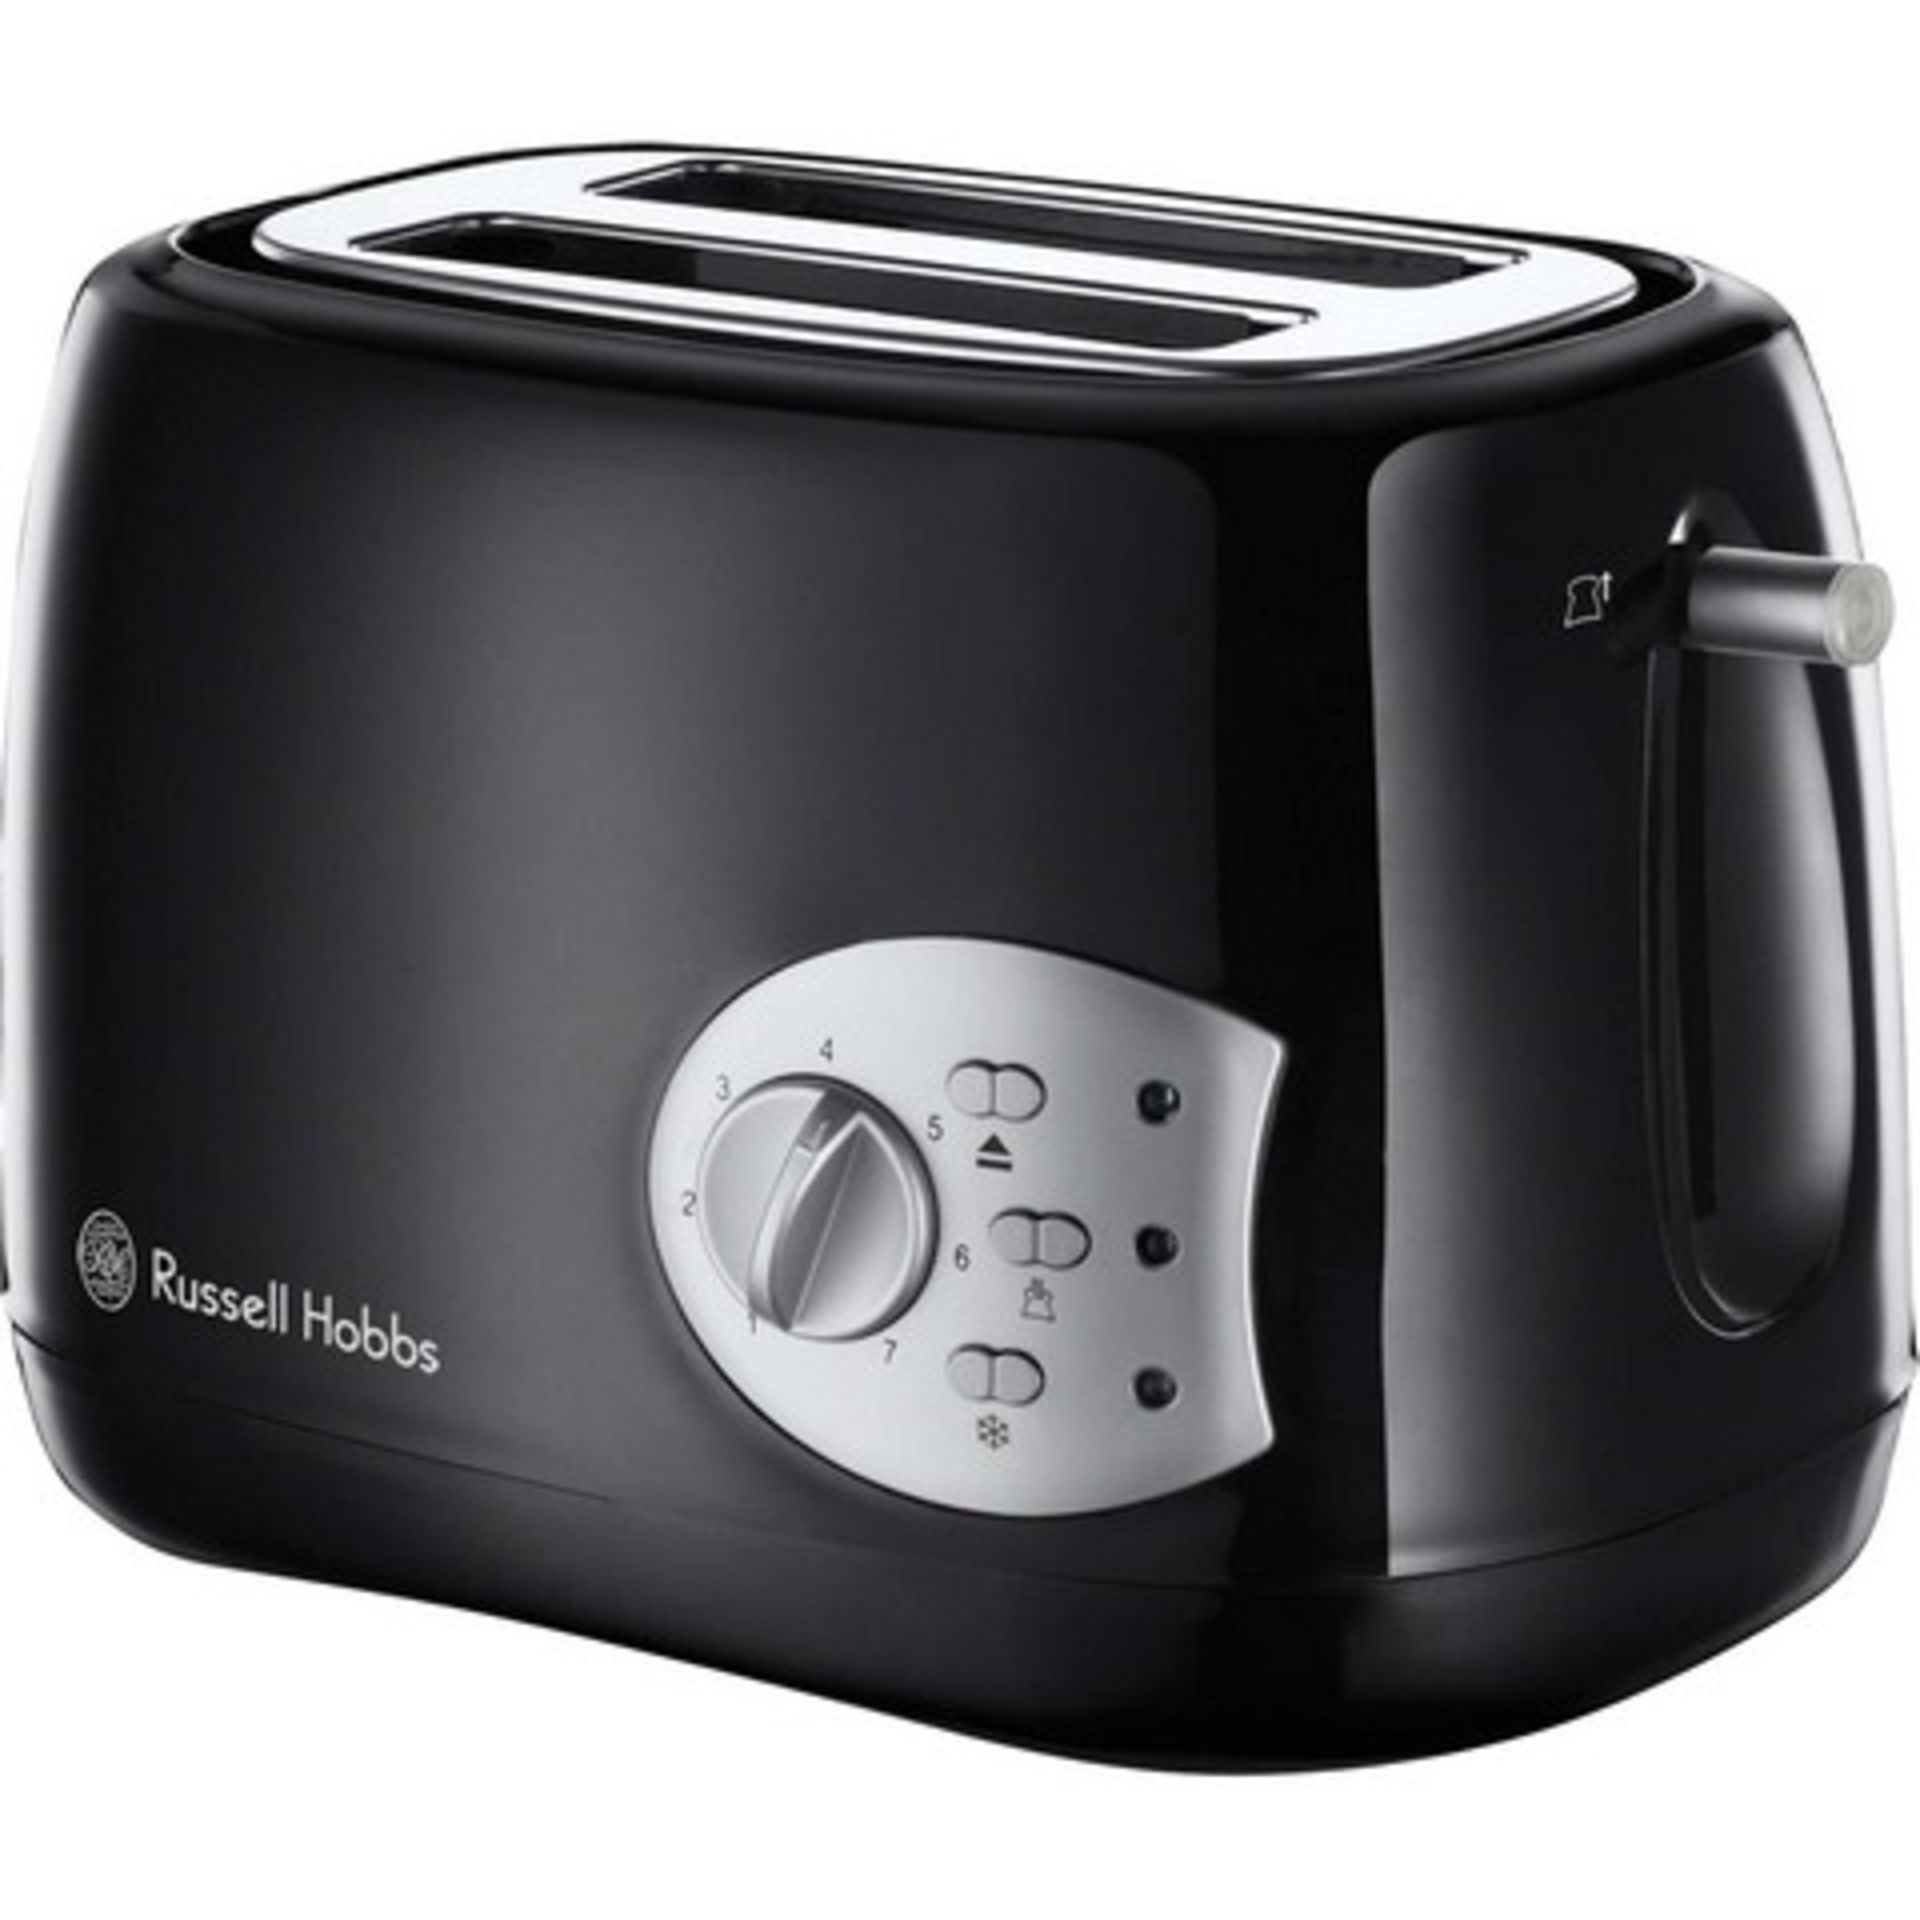 + VAT Brand New Russell Hobbs Two Slice Toaster - With Reheat/Frozen/Cancel Features - Variable